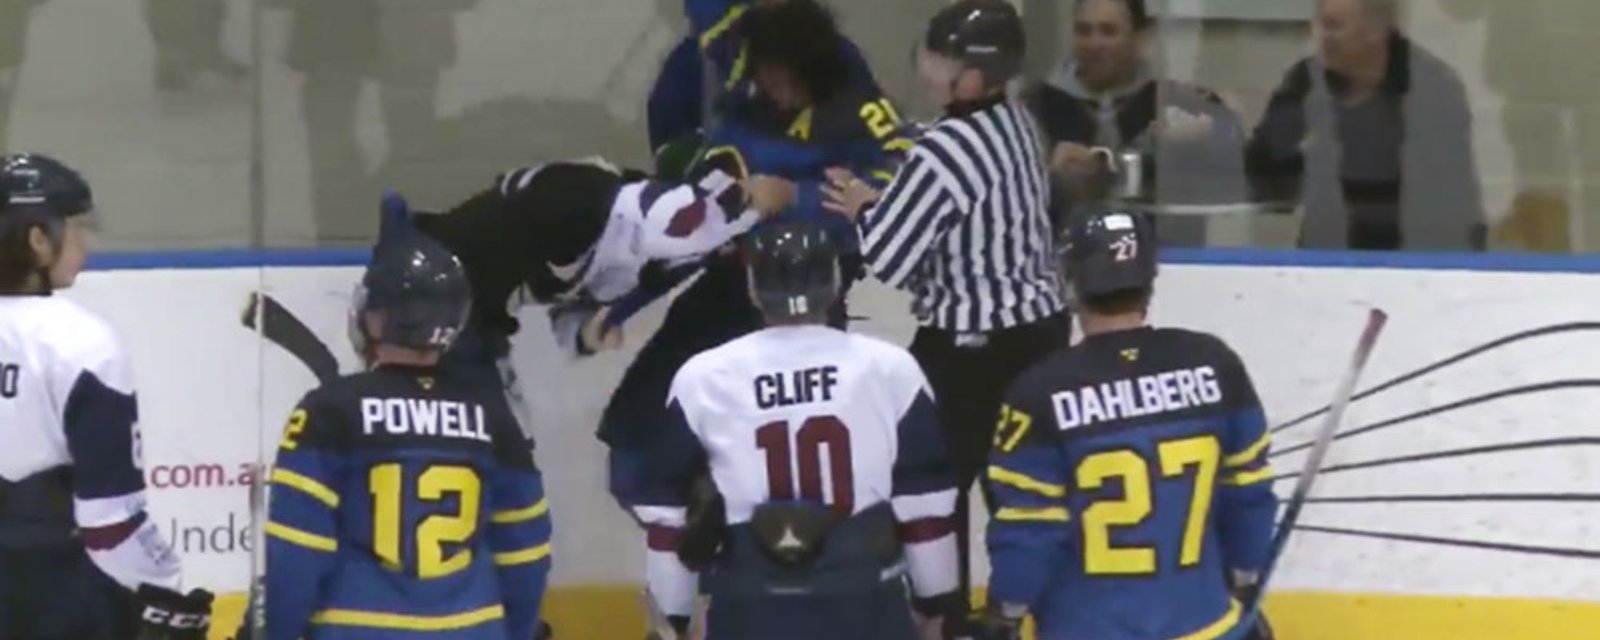 Brutal elbow in AIHL fight earns player lengthy suspension